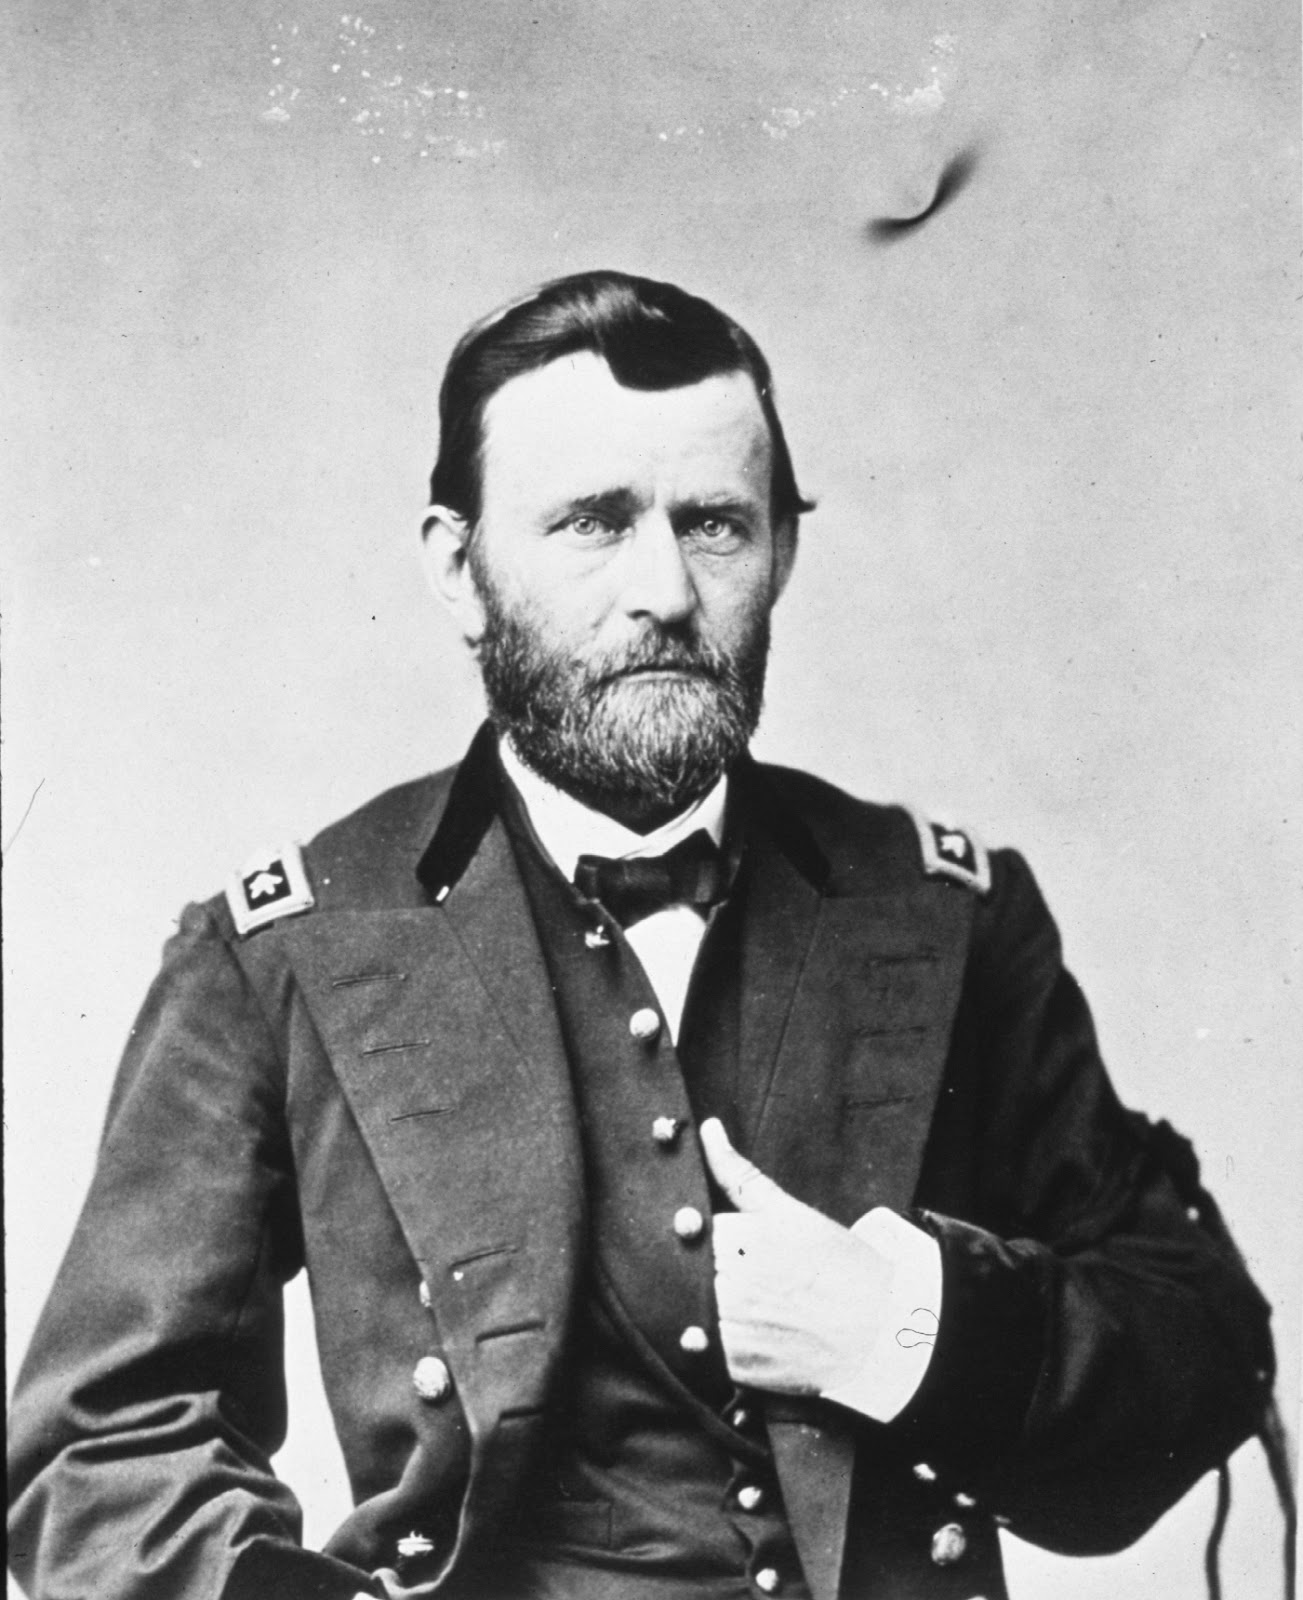 Taking a Look at Ulysses S Grant